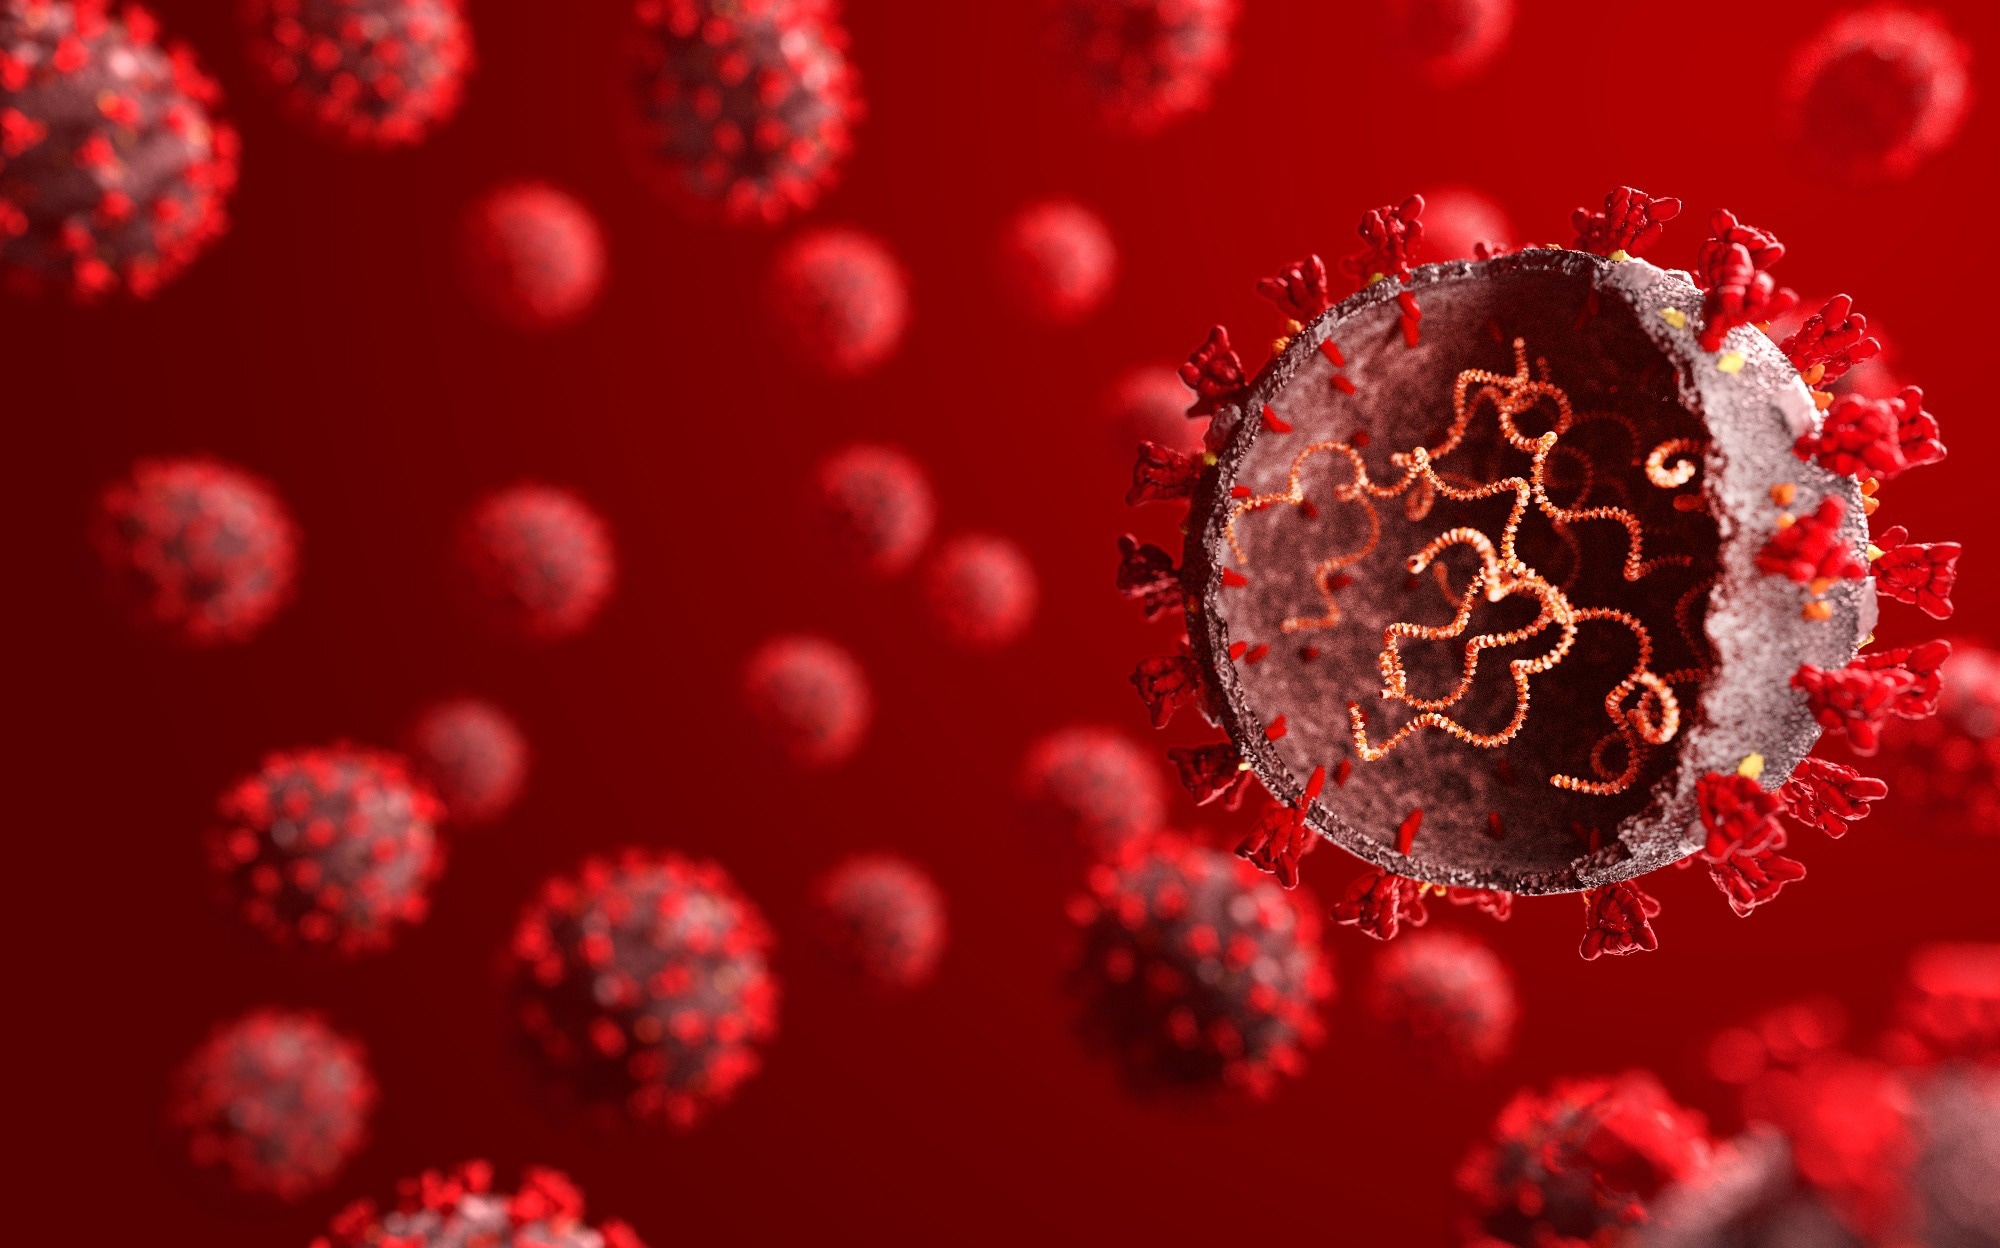 Study: Nanoparticle display of prefusion coronavirus spike elicits S1-focused cross-reactive protection across divergent subgroups. Image Credit: Orpheus FX / Shutterstock